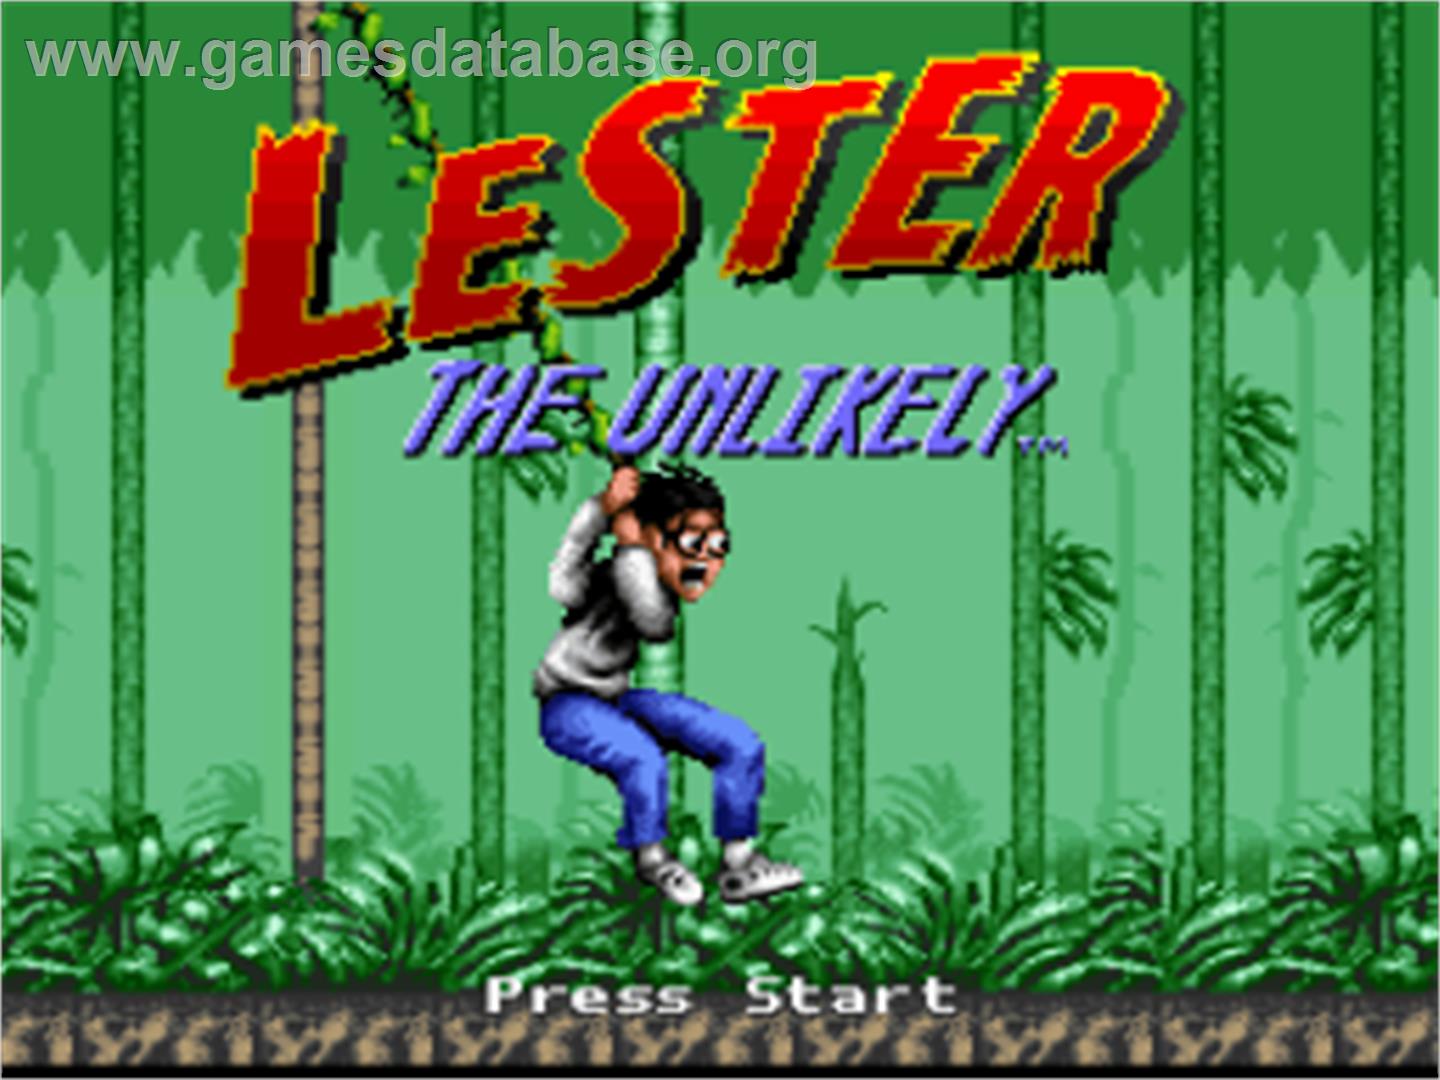 Lester the Unlikely - Nintendo SNES - Artwork - Title Screen